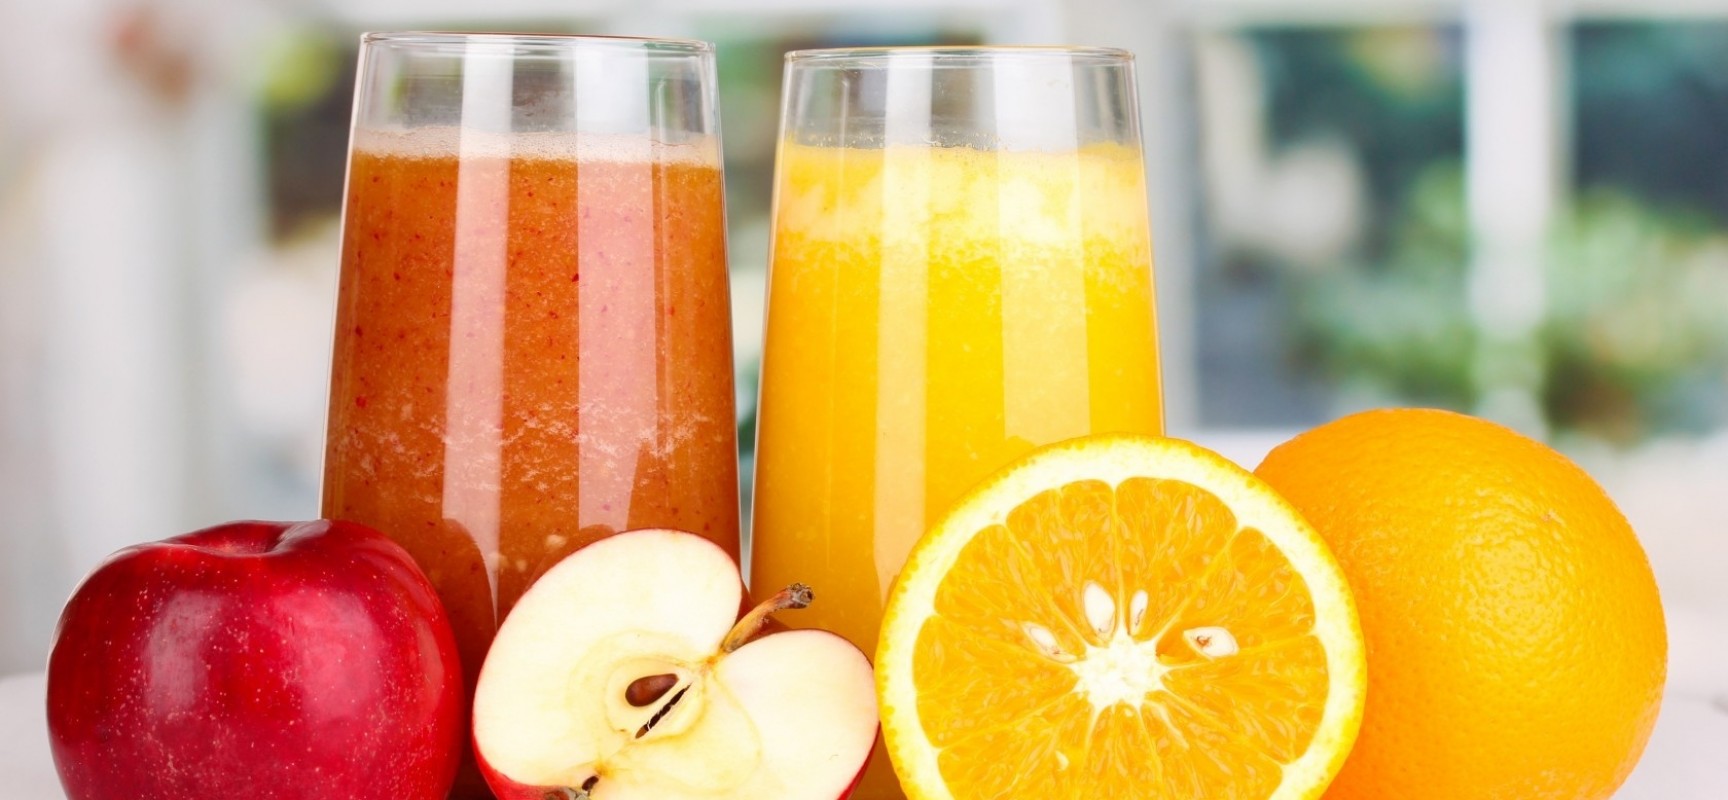 Why are juices turning out to be unhealthy?